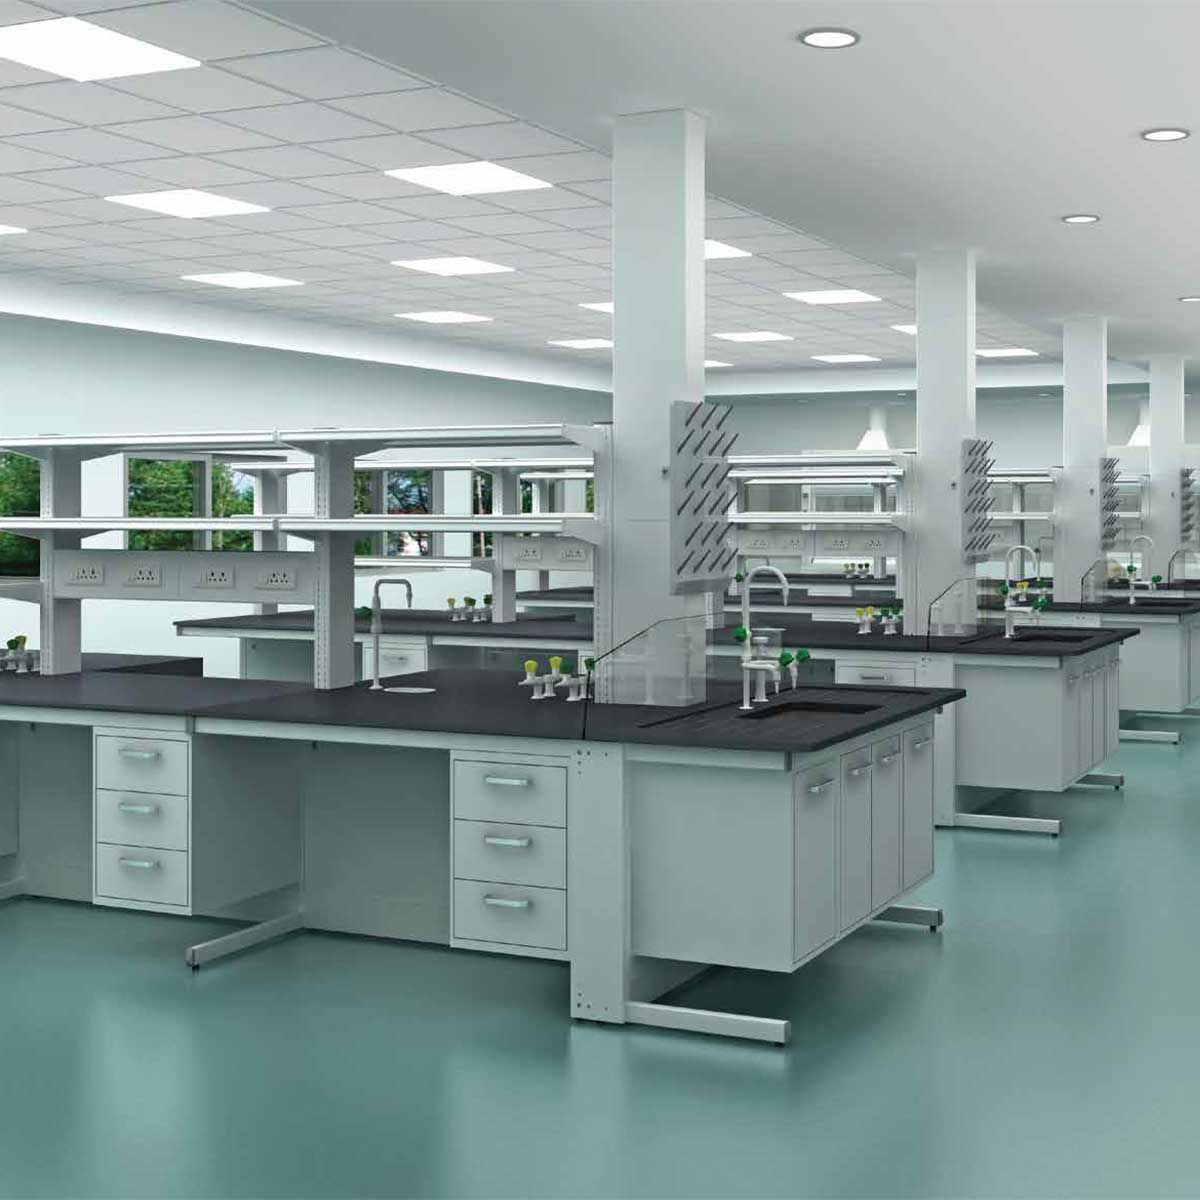 Modular Lab Furniture Manufacturers, Suppliers in Noida Sector 63